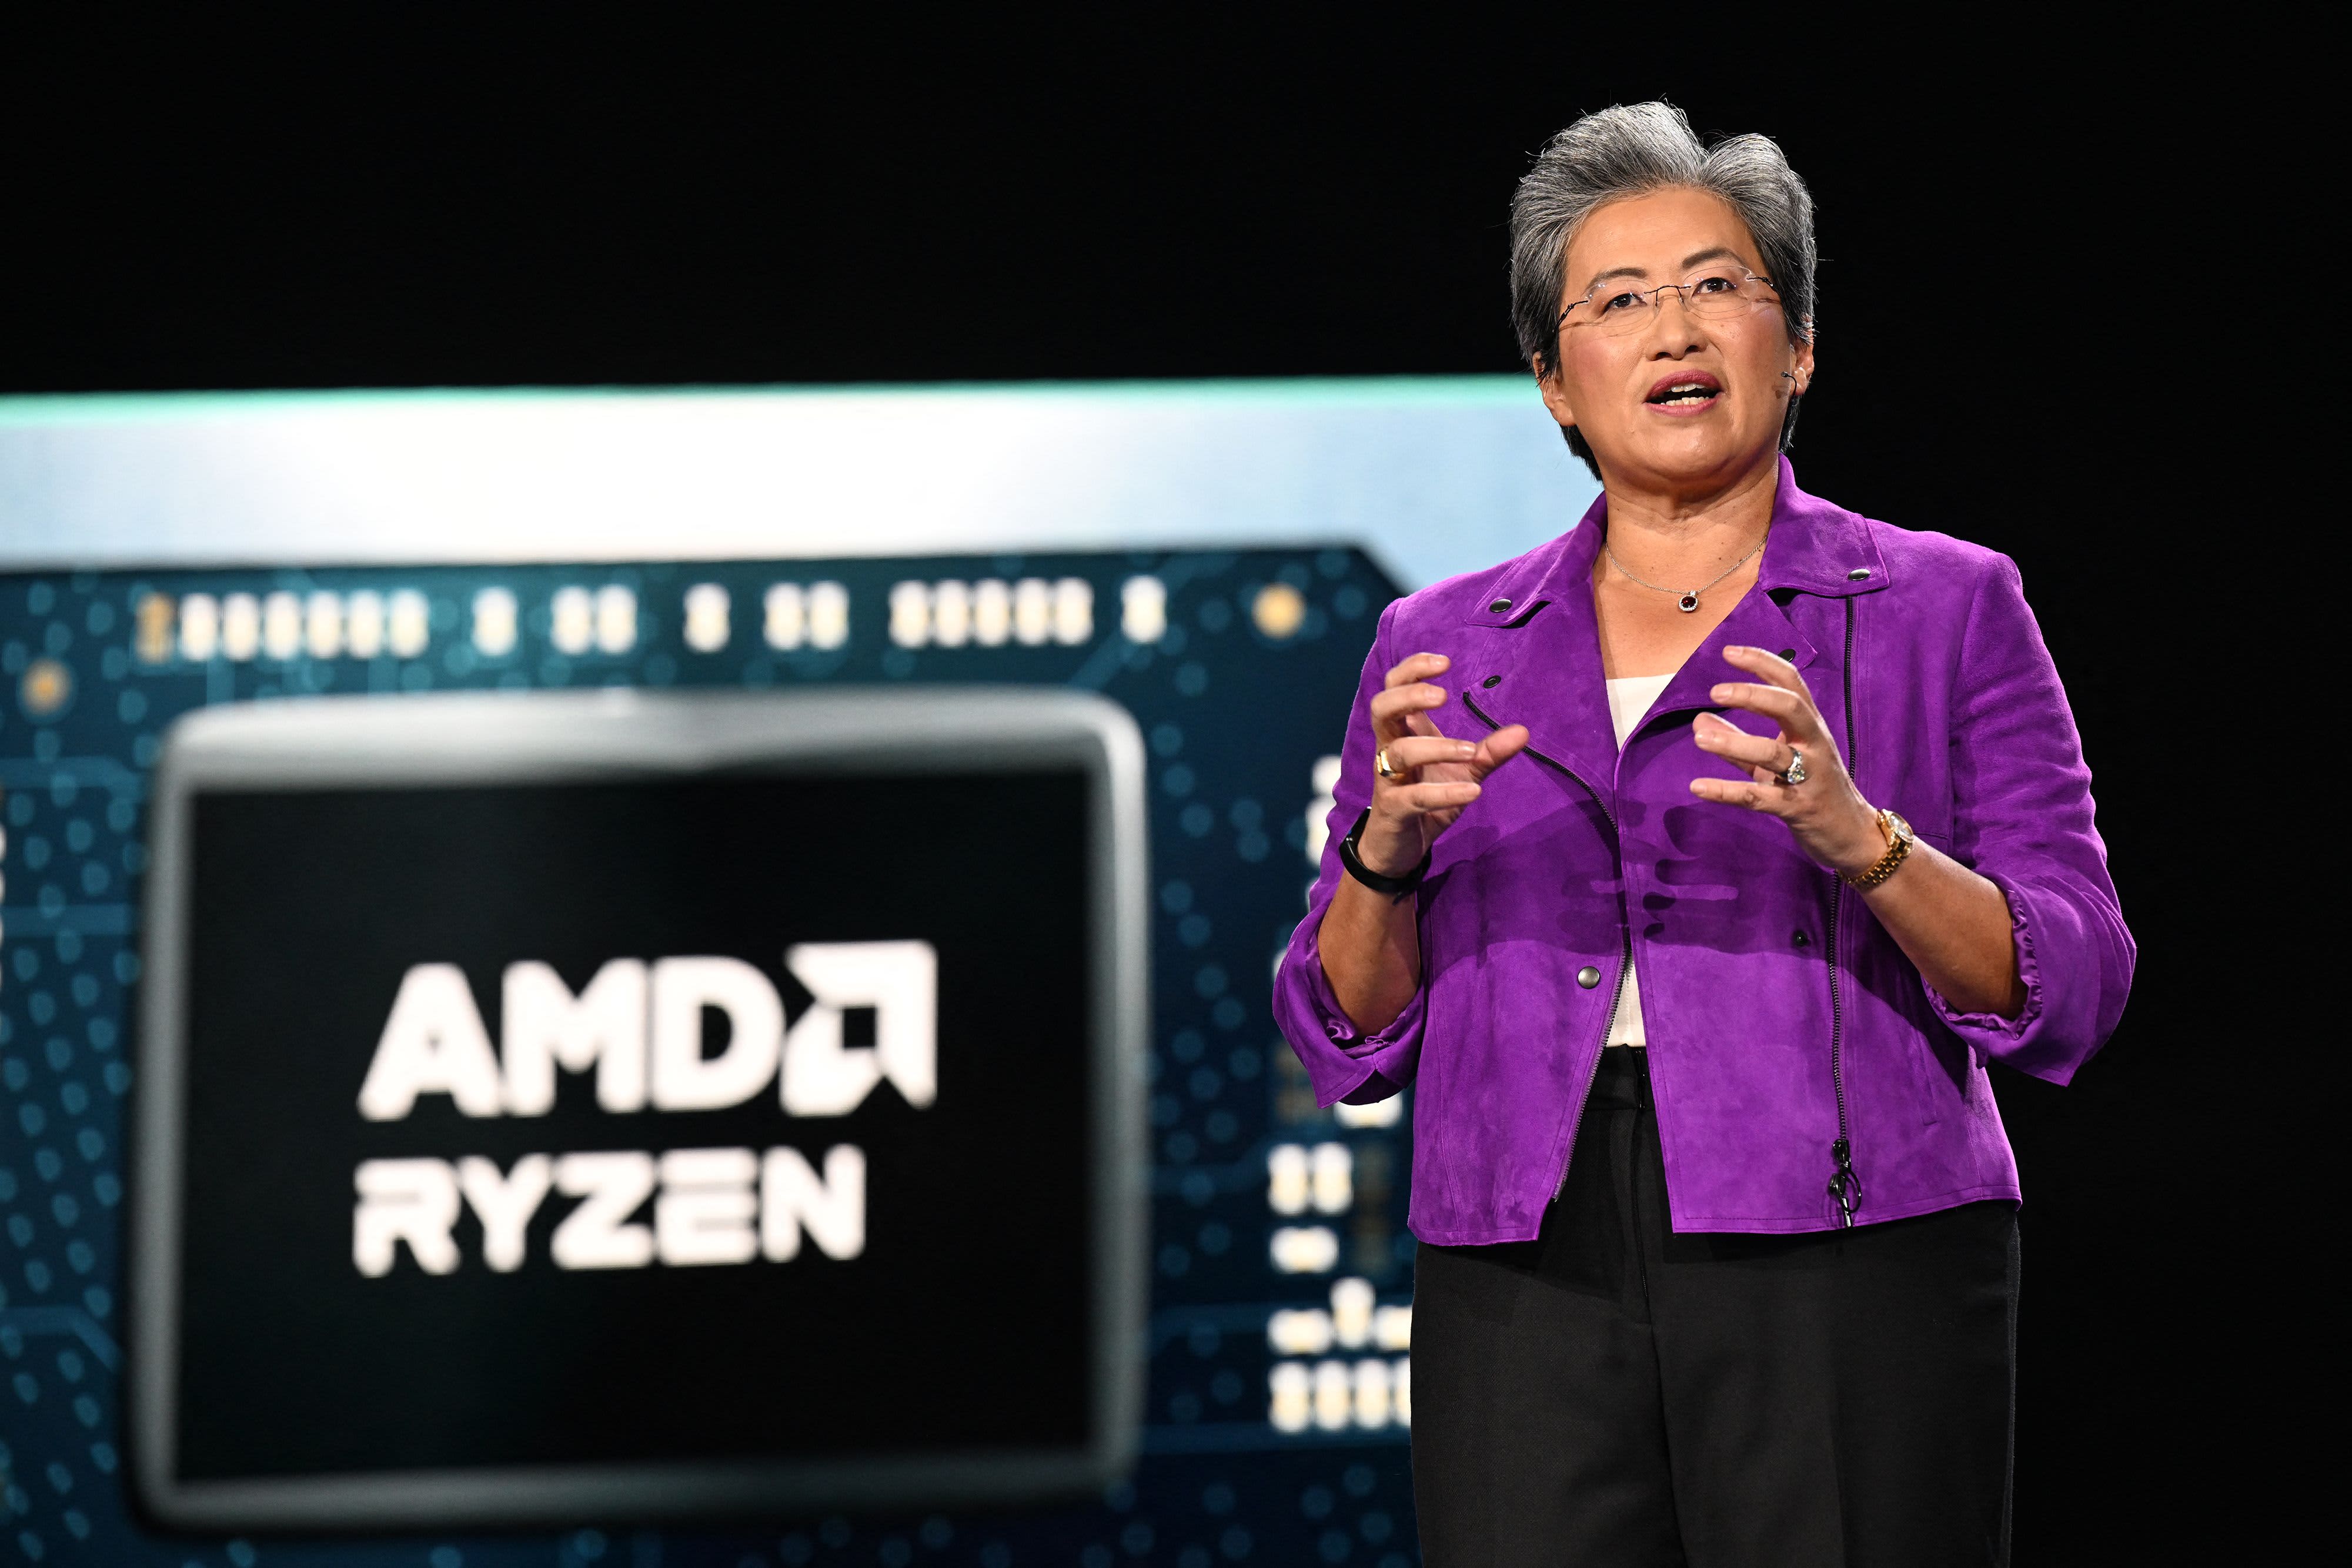 Here's the trade on AMD ahead of earnings, according to top analysts